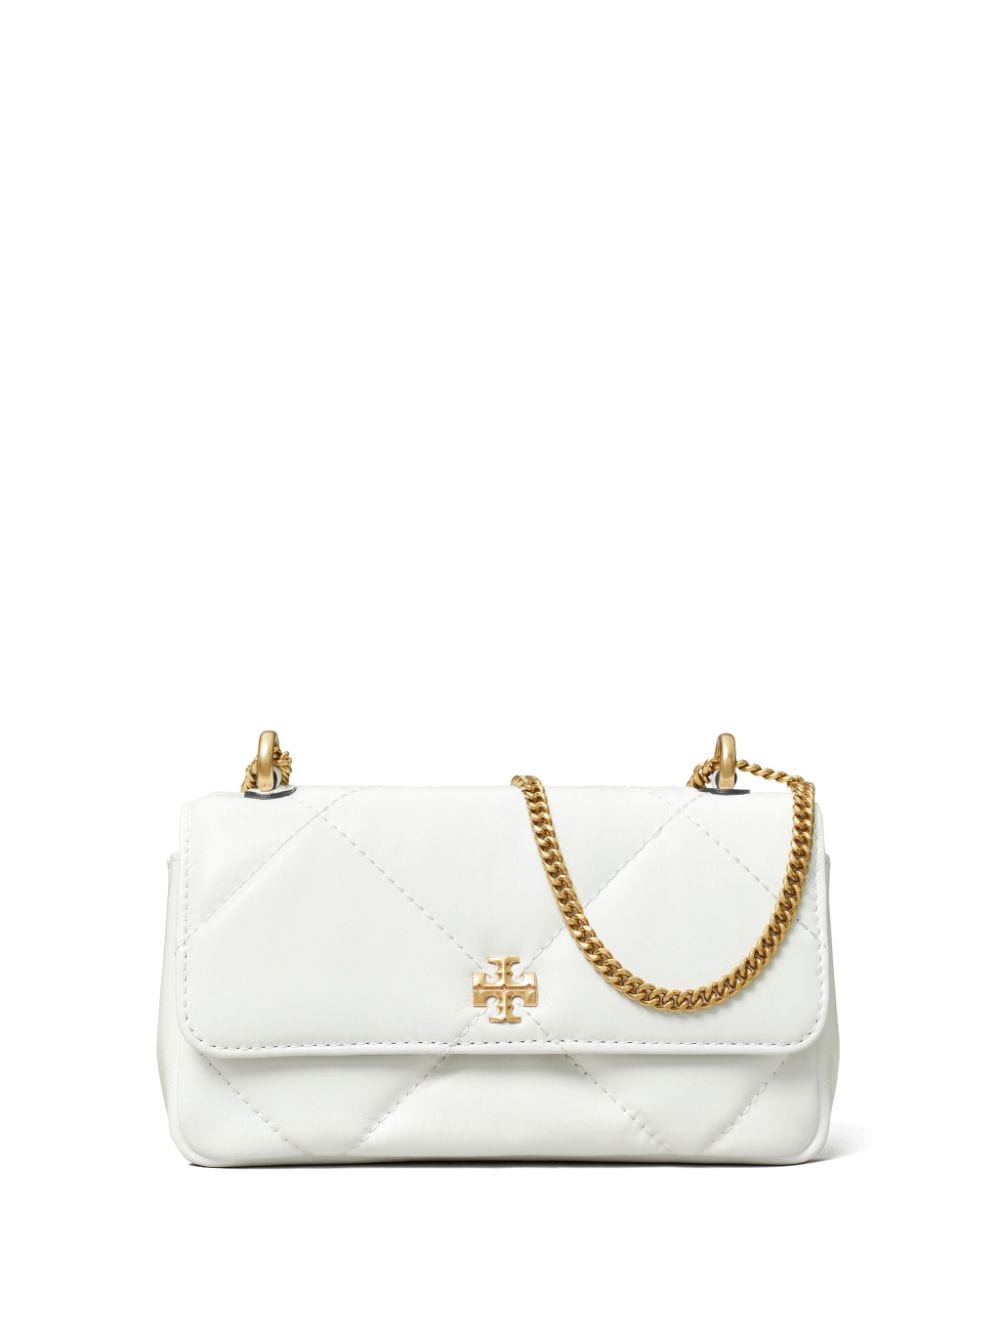 Image 1 of Tory Burch Kira quilted leather crossbody bag